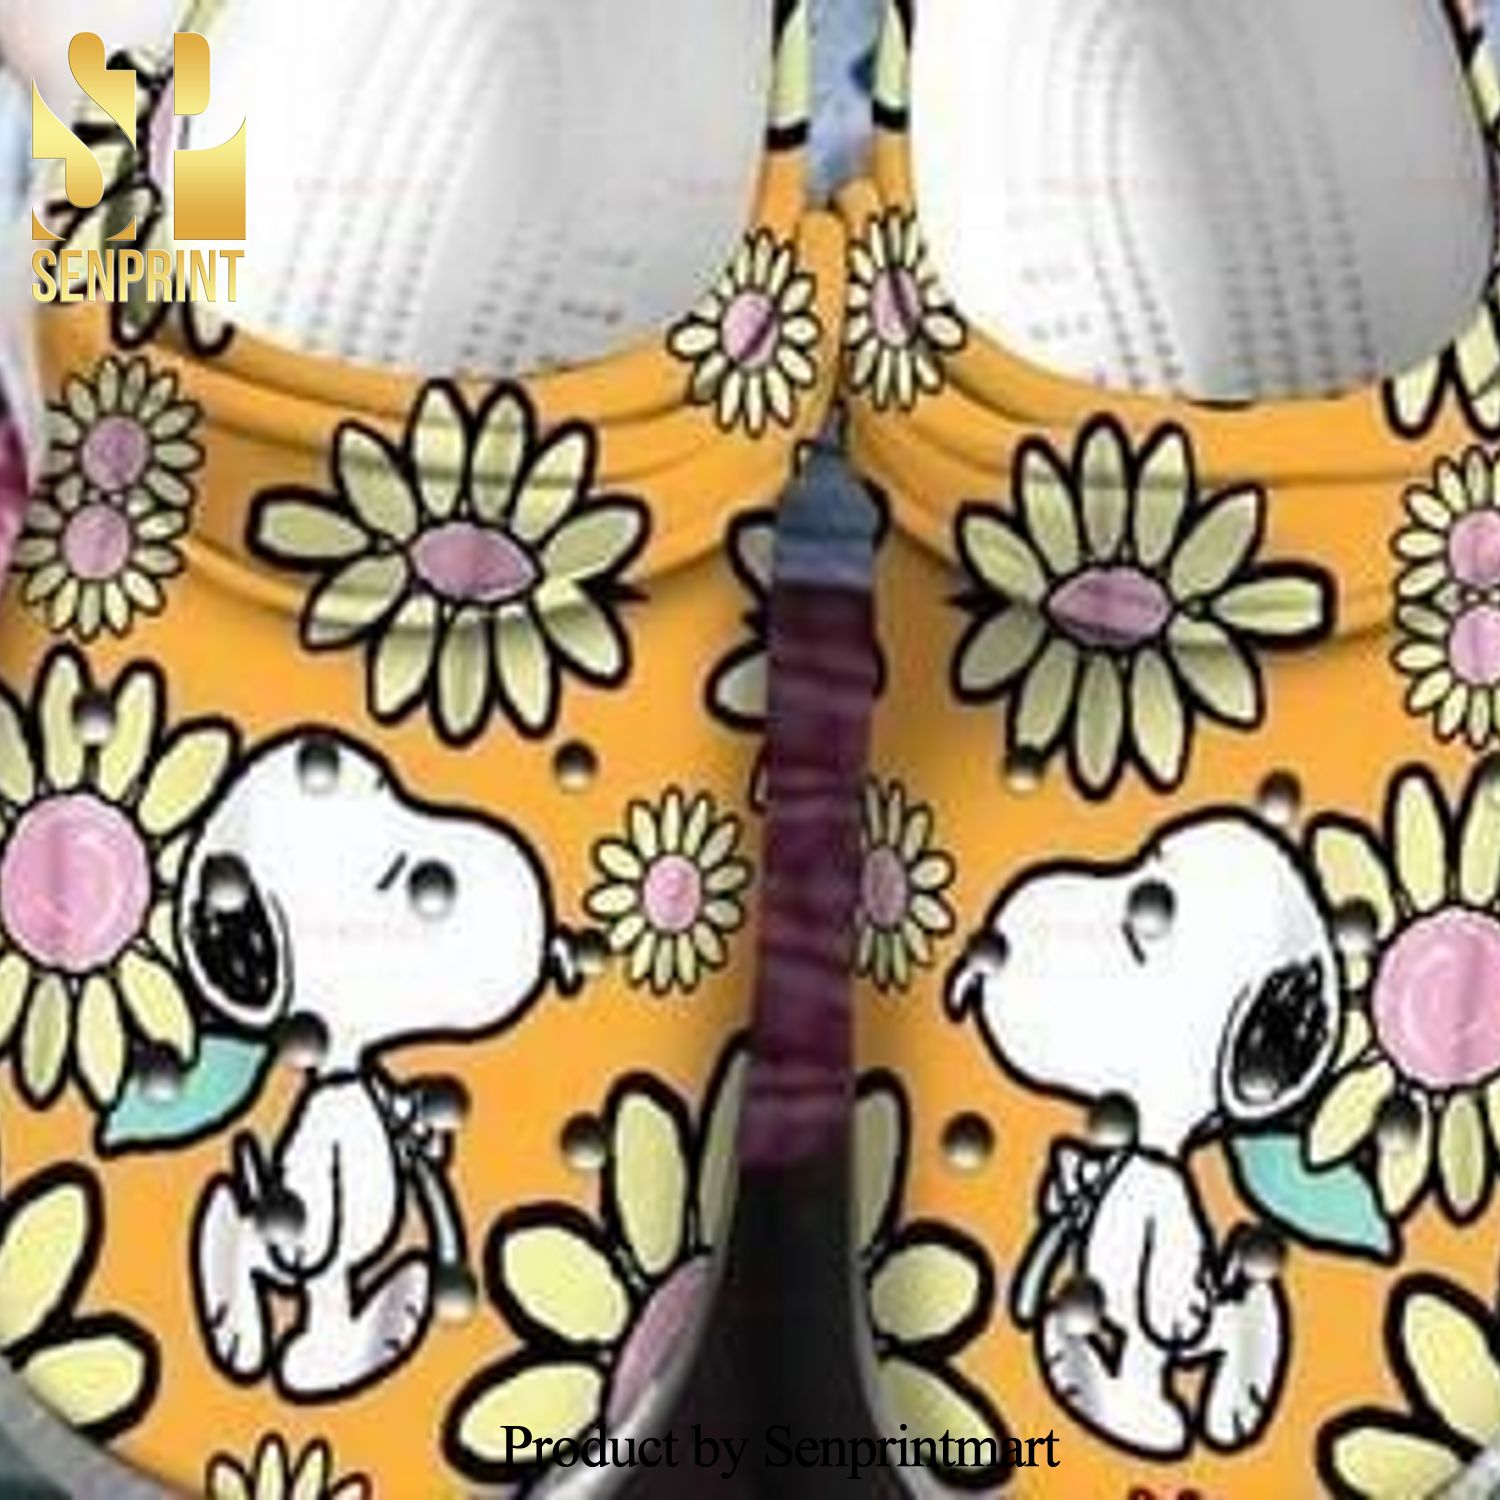 Snoopy Crocs 3D Shoes Snoopy Flower For Snoopy Lover Snoopy New Outfit Crocs Crocband Adult Clogs